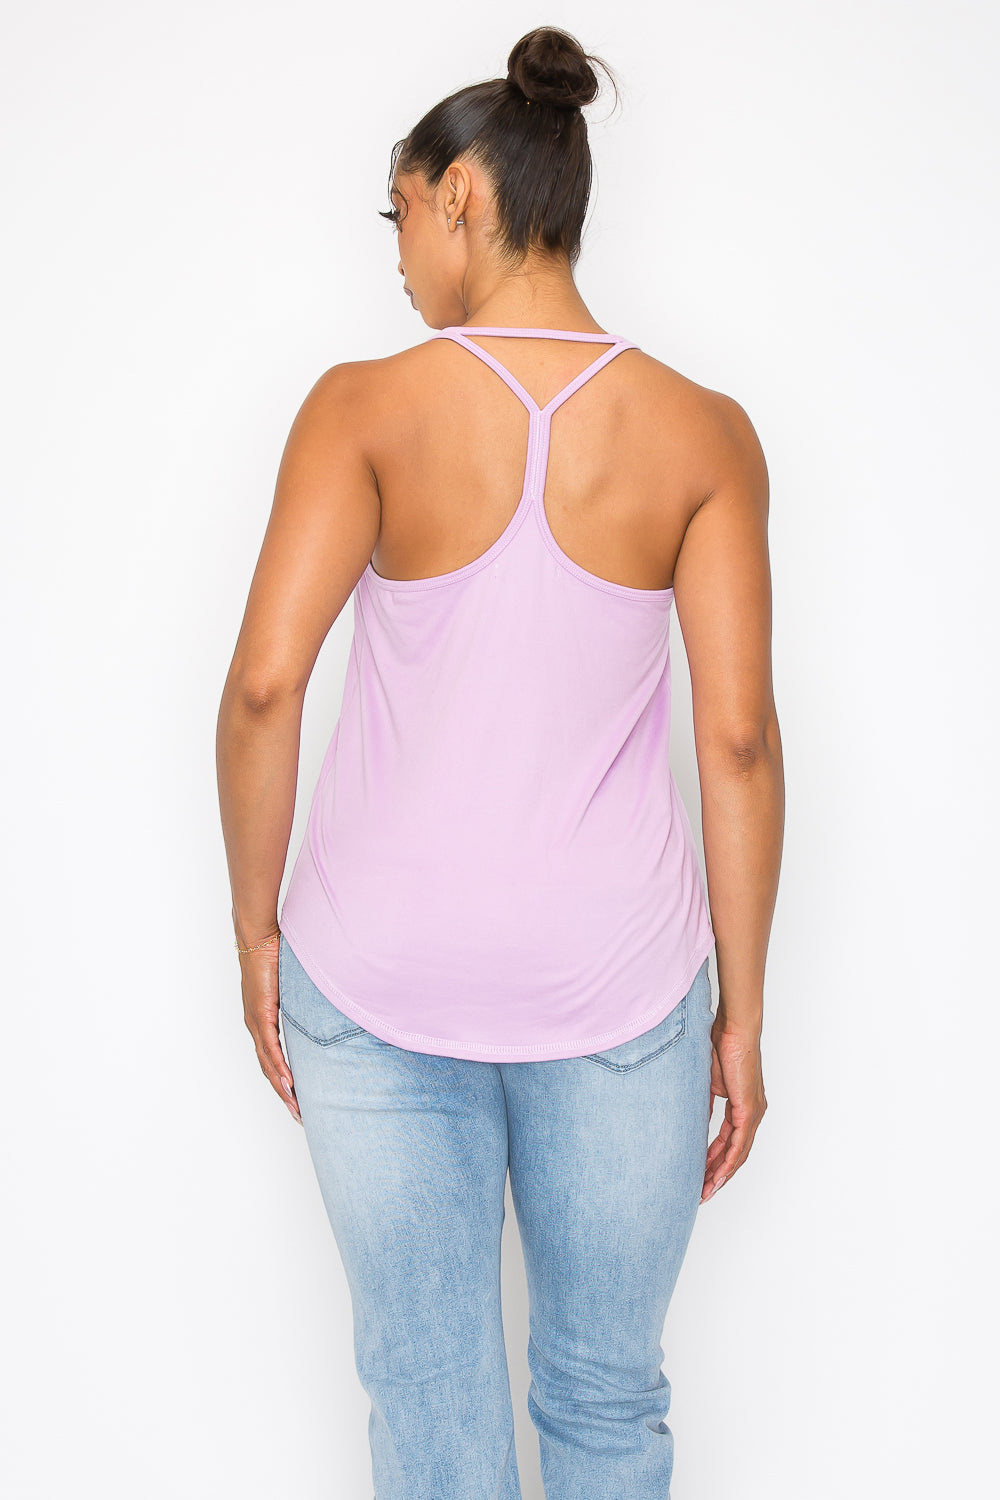 Lemedy Strappy Back Tank Top for Women with Built in Bra Workout Yoga  Shirts (Lavender Grey, S) at  Women's Clothing store